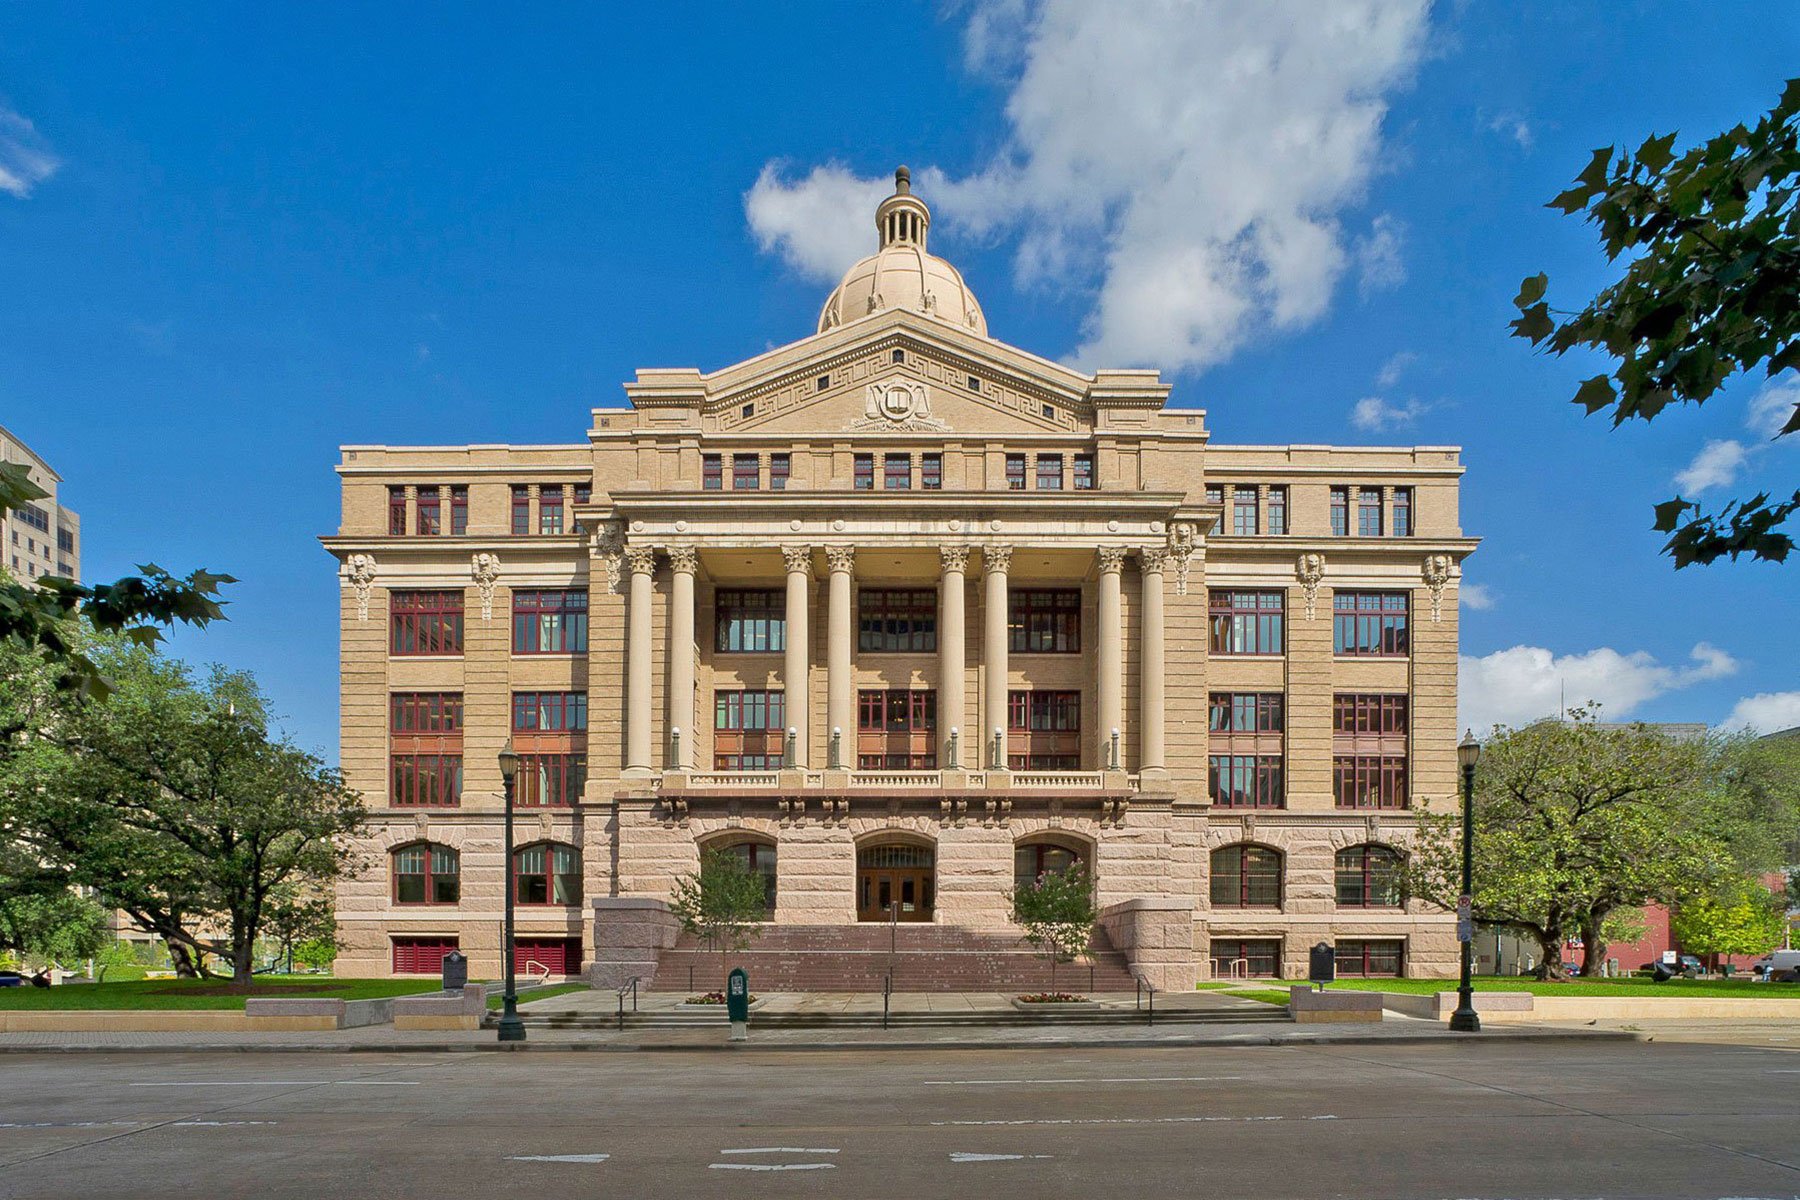  next Architecture Walk   Courthouse District   Sunday afternoon, May 19   Learn more  